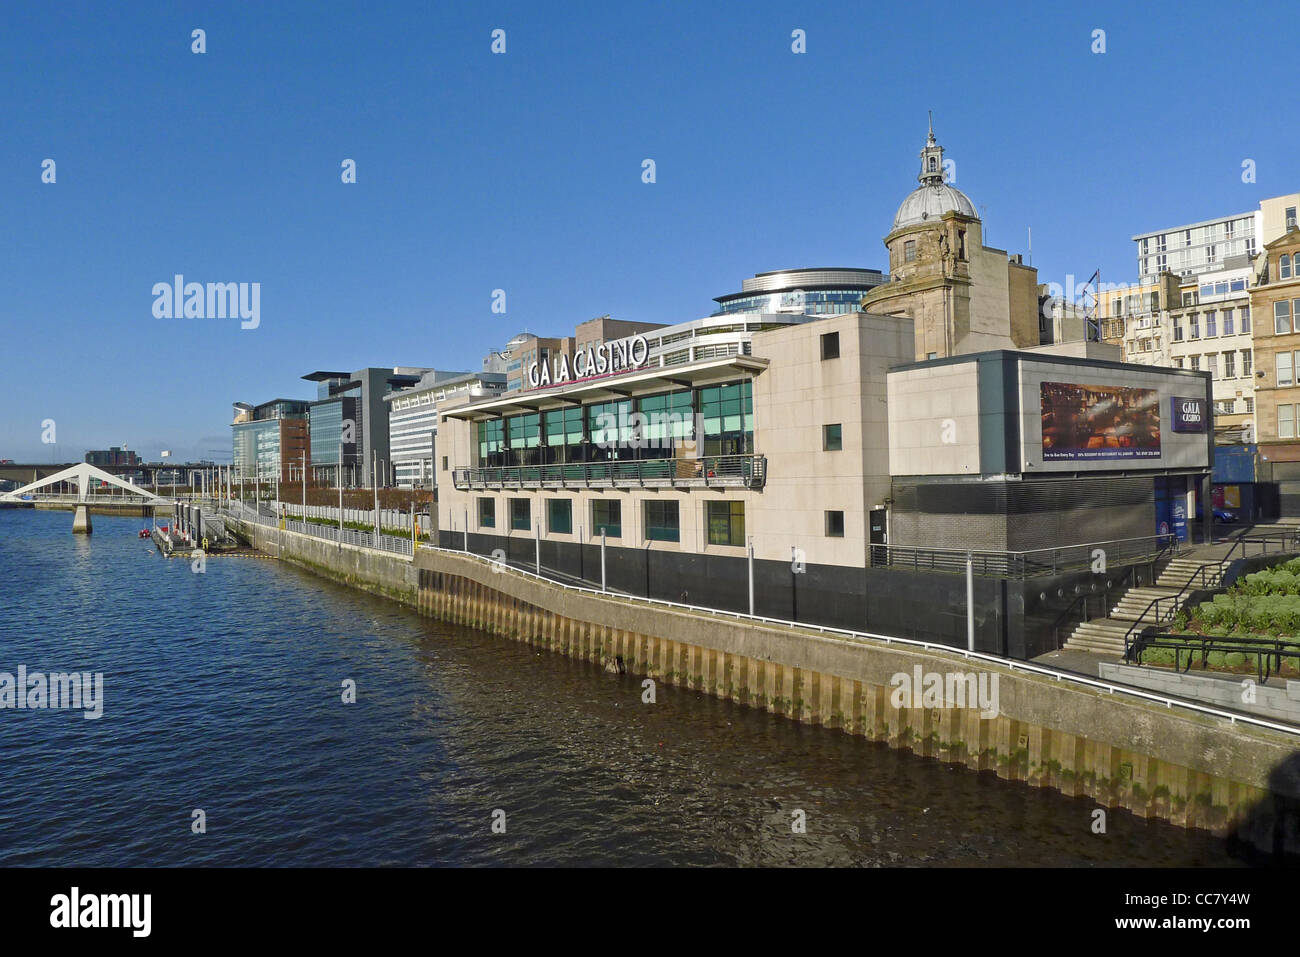 Buildings from the pedestrian Tradeston Bridge area along Atlantic Quay on the River Clyde in Glasgow to the Gala Casino Stock Photo